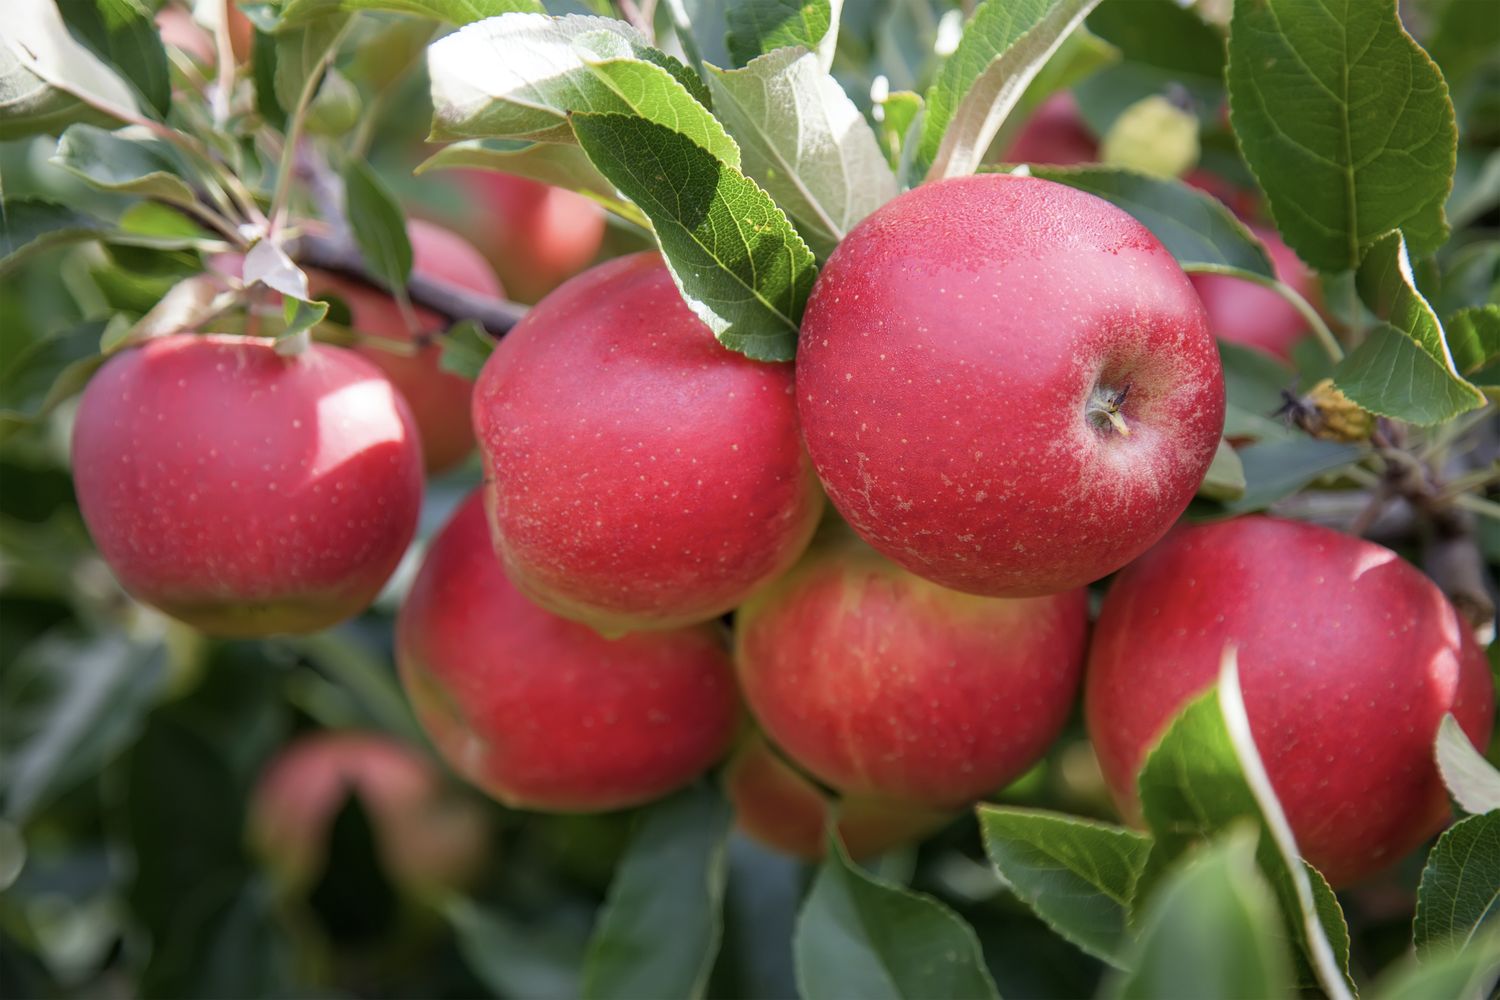 RedPop® Apples Information and Facts